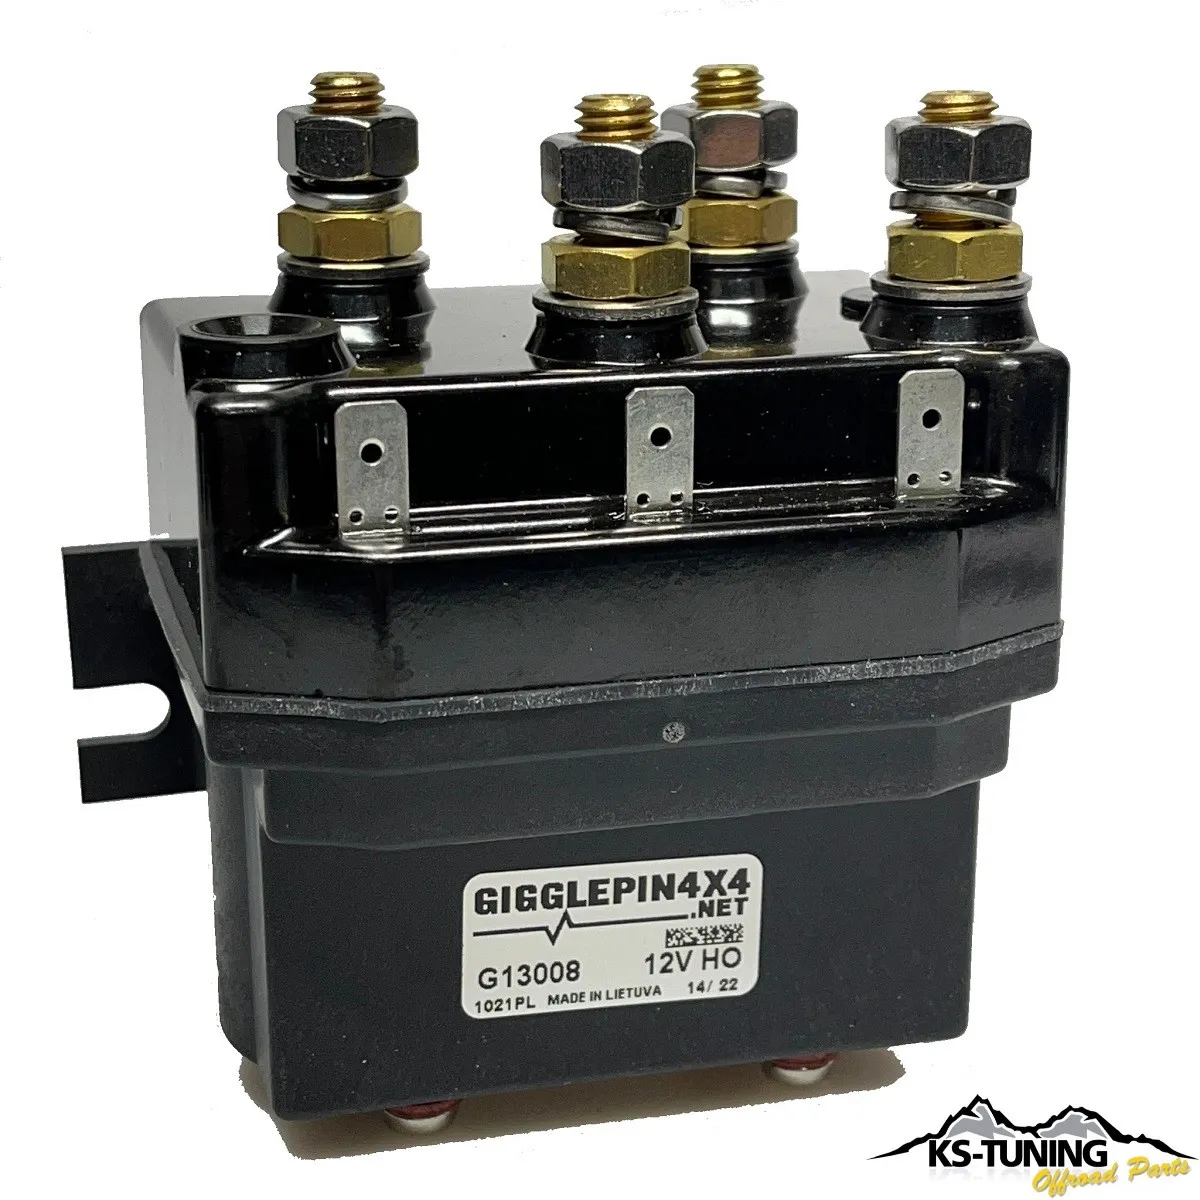 https://www.ks-tuning.de/images/product_images/popup_images/gigglepin-g13008-g13009-pro-series-albright-solenoid-contactor_35950.webp